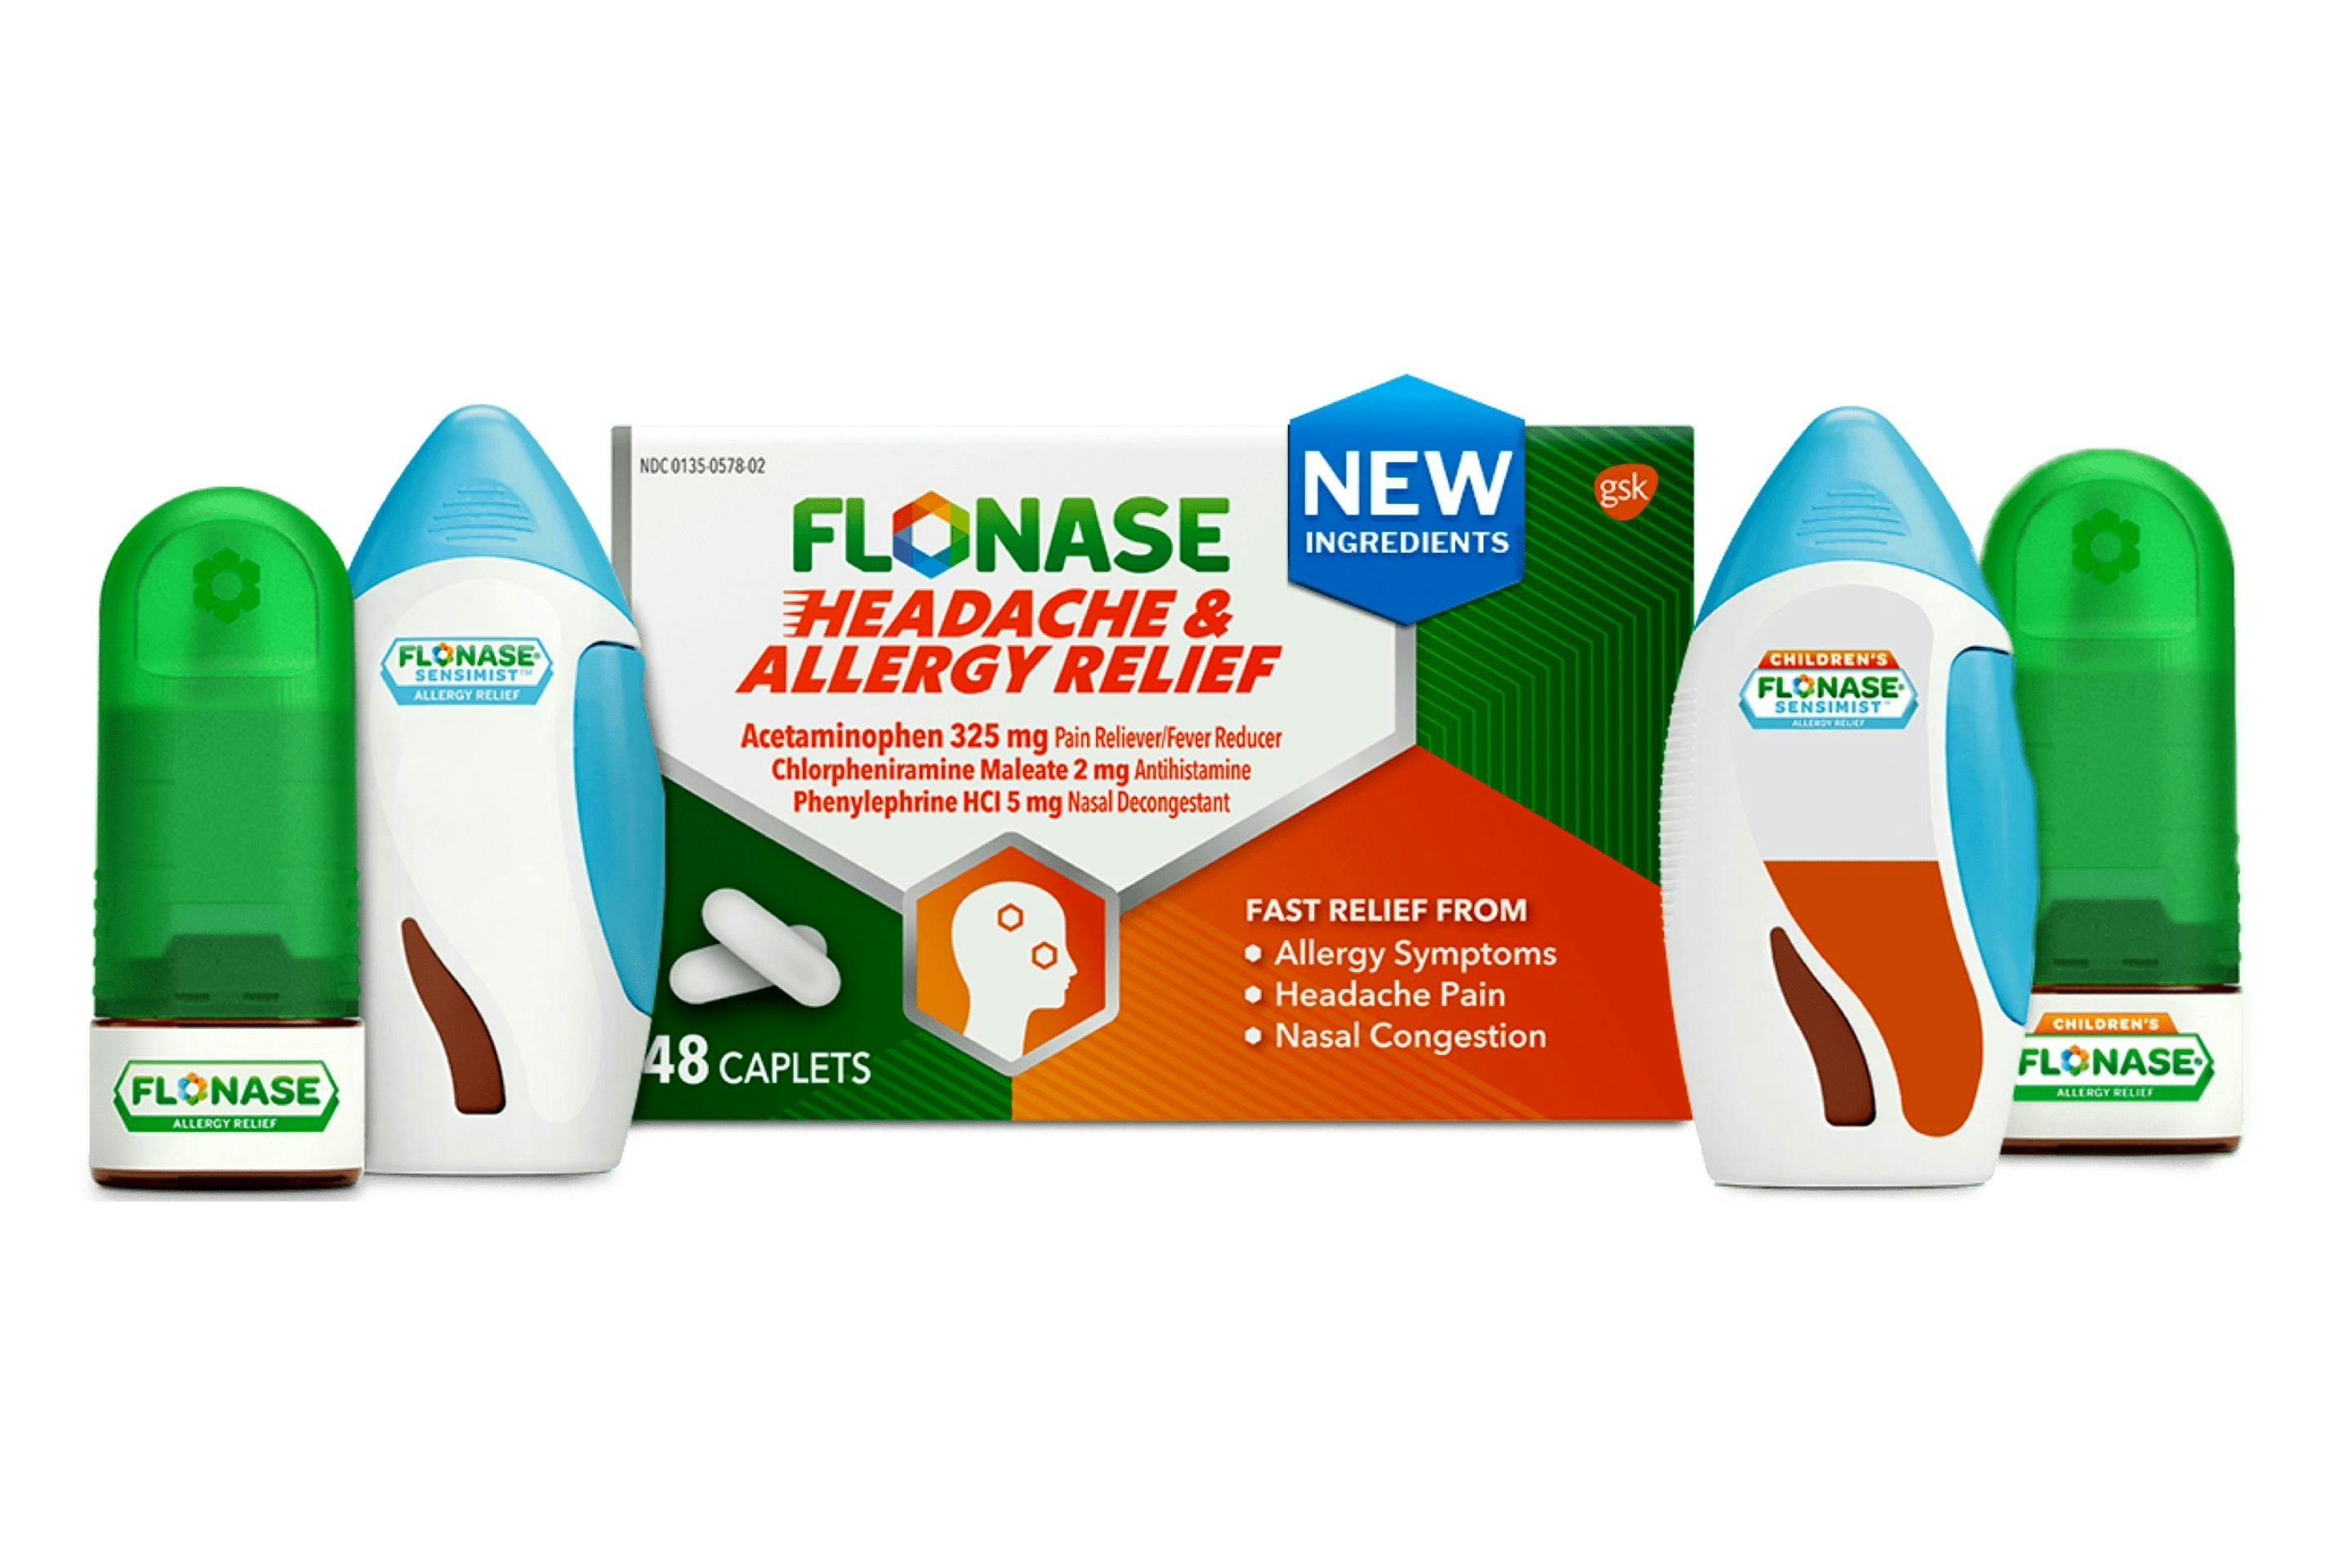 Flonase allergy relief products 